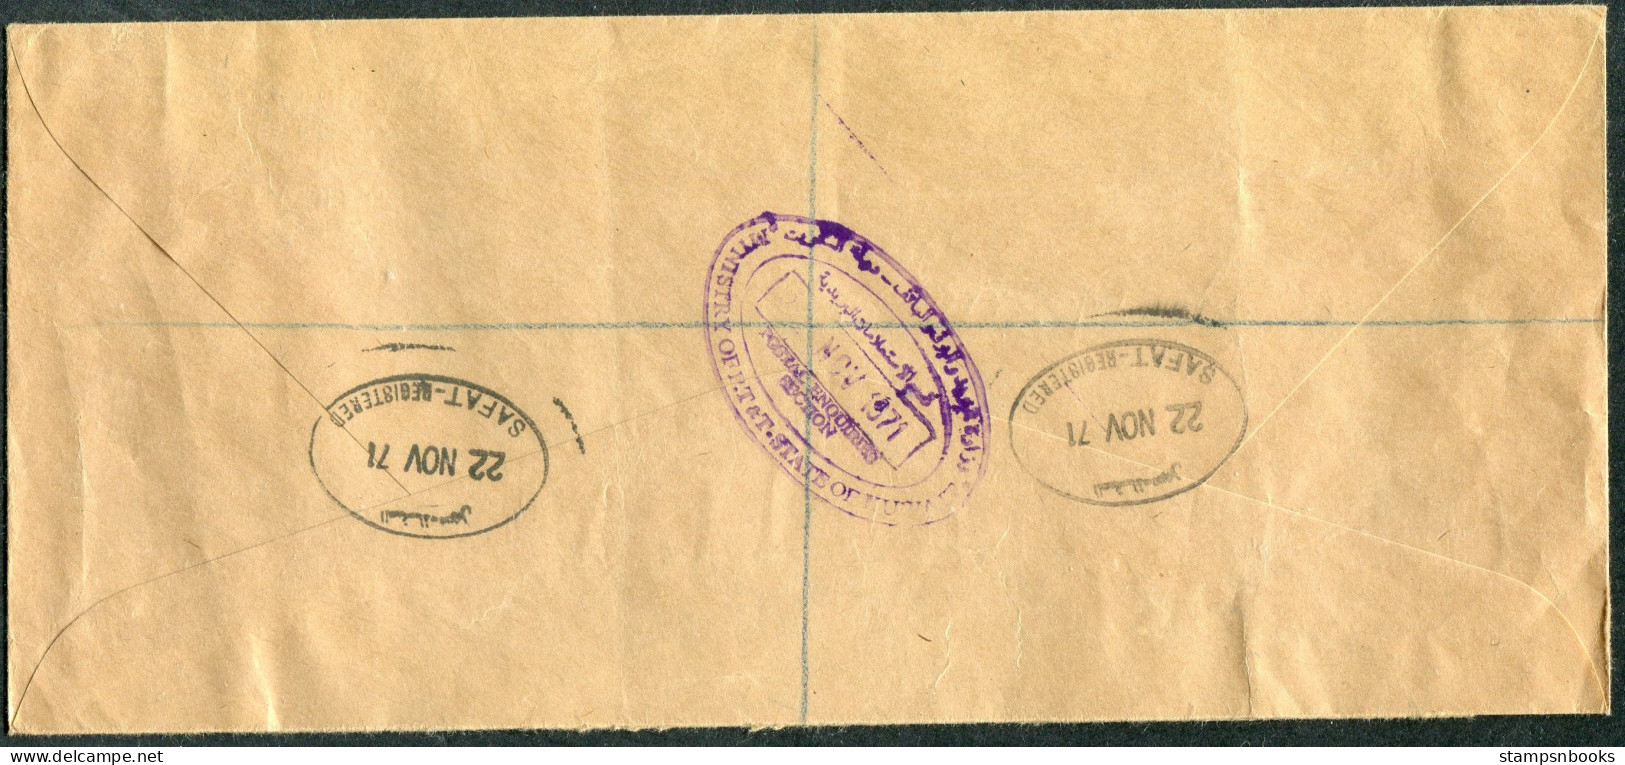 1971 Kuwait Safat Reg. Ministry Of Posts, Telegraphs & Telephones Official Cover - The Director Of Posts, Oslo Norway - Kuwait